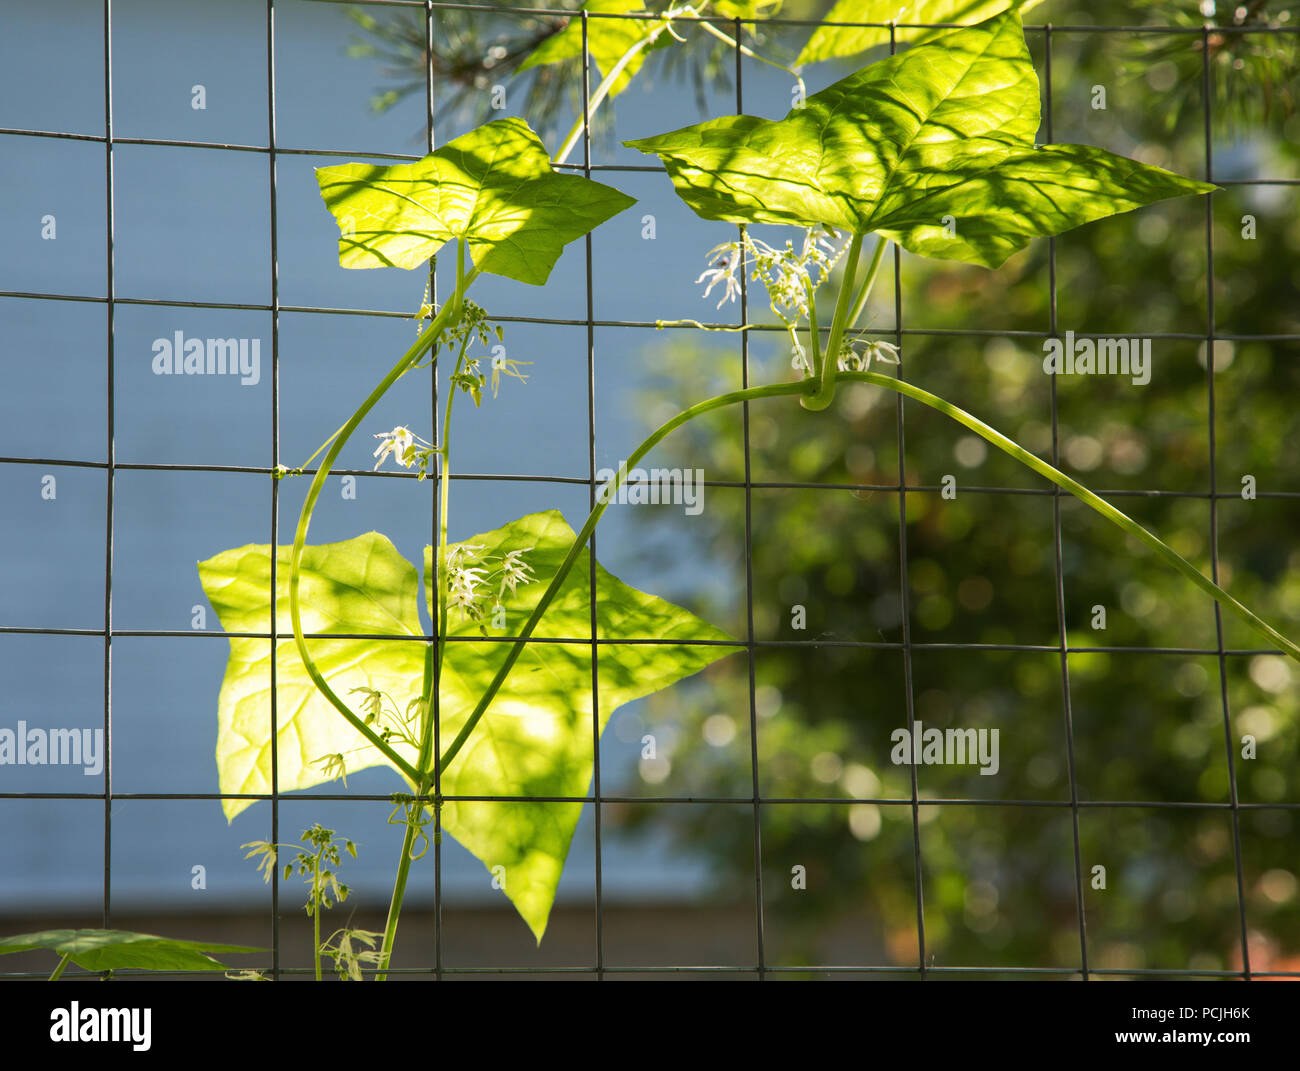 climbing plant with flowers on a wire mesh Stock Photo